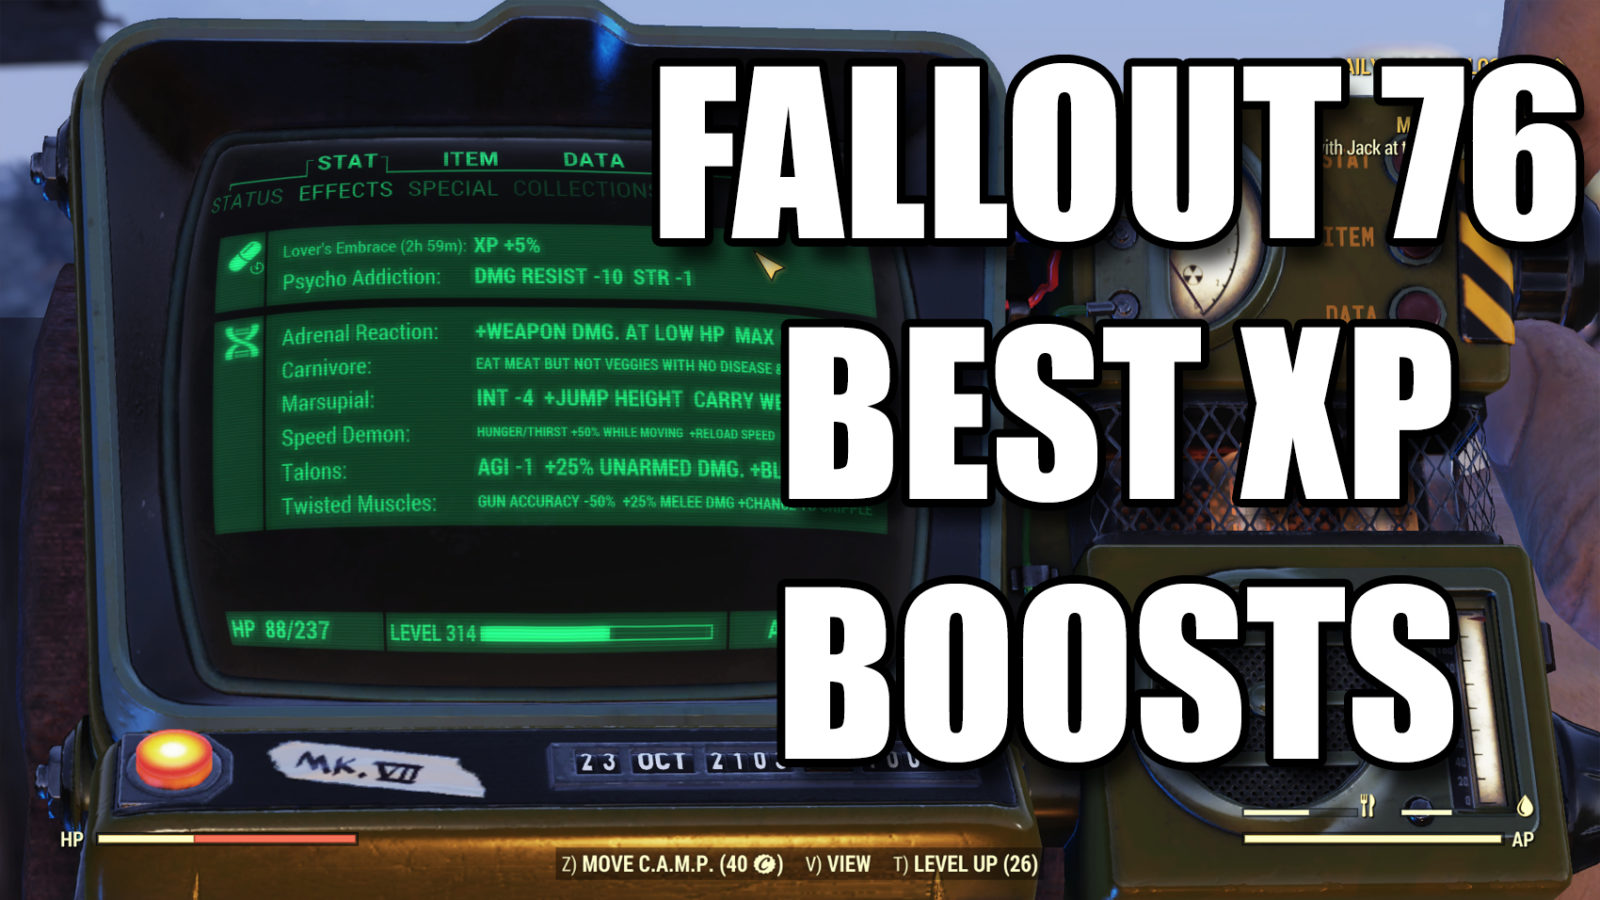 Fallout 76 Best XP Boosts